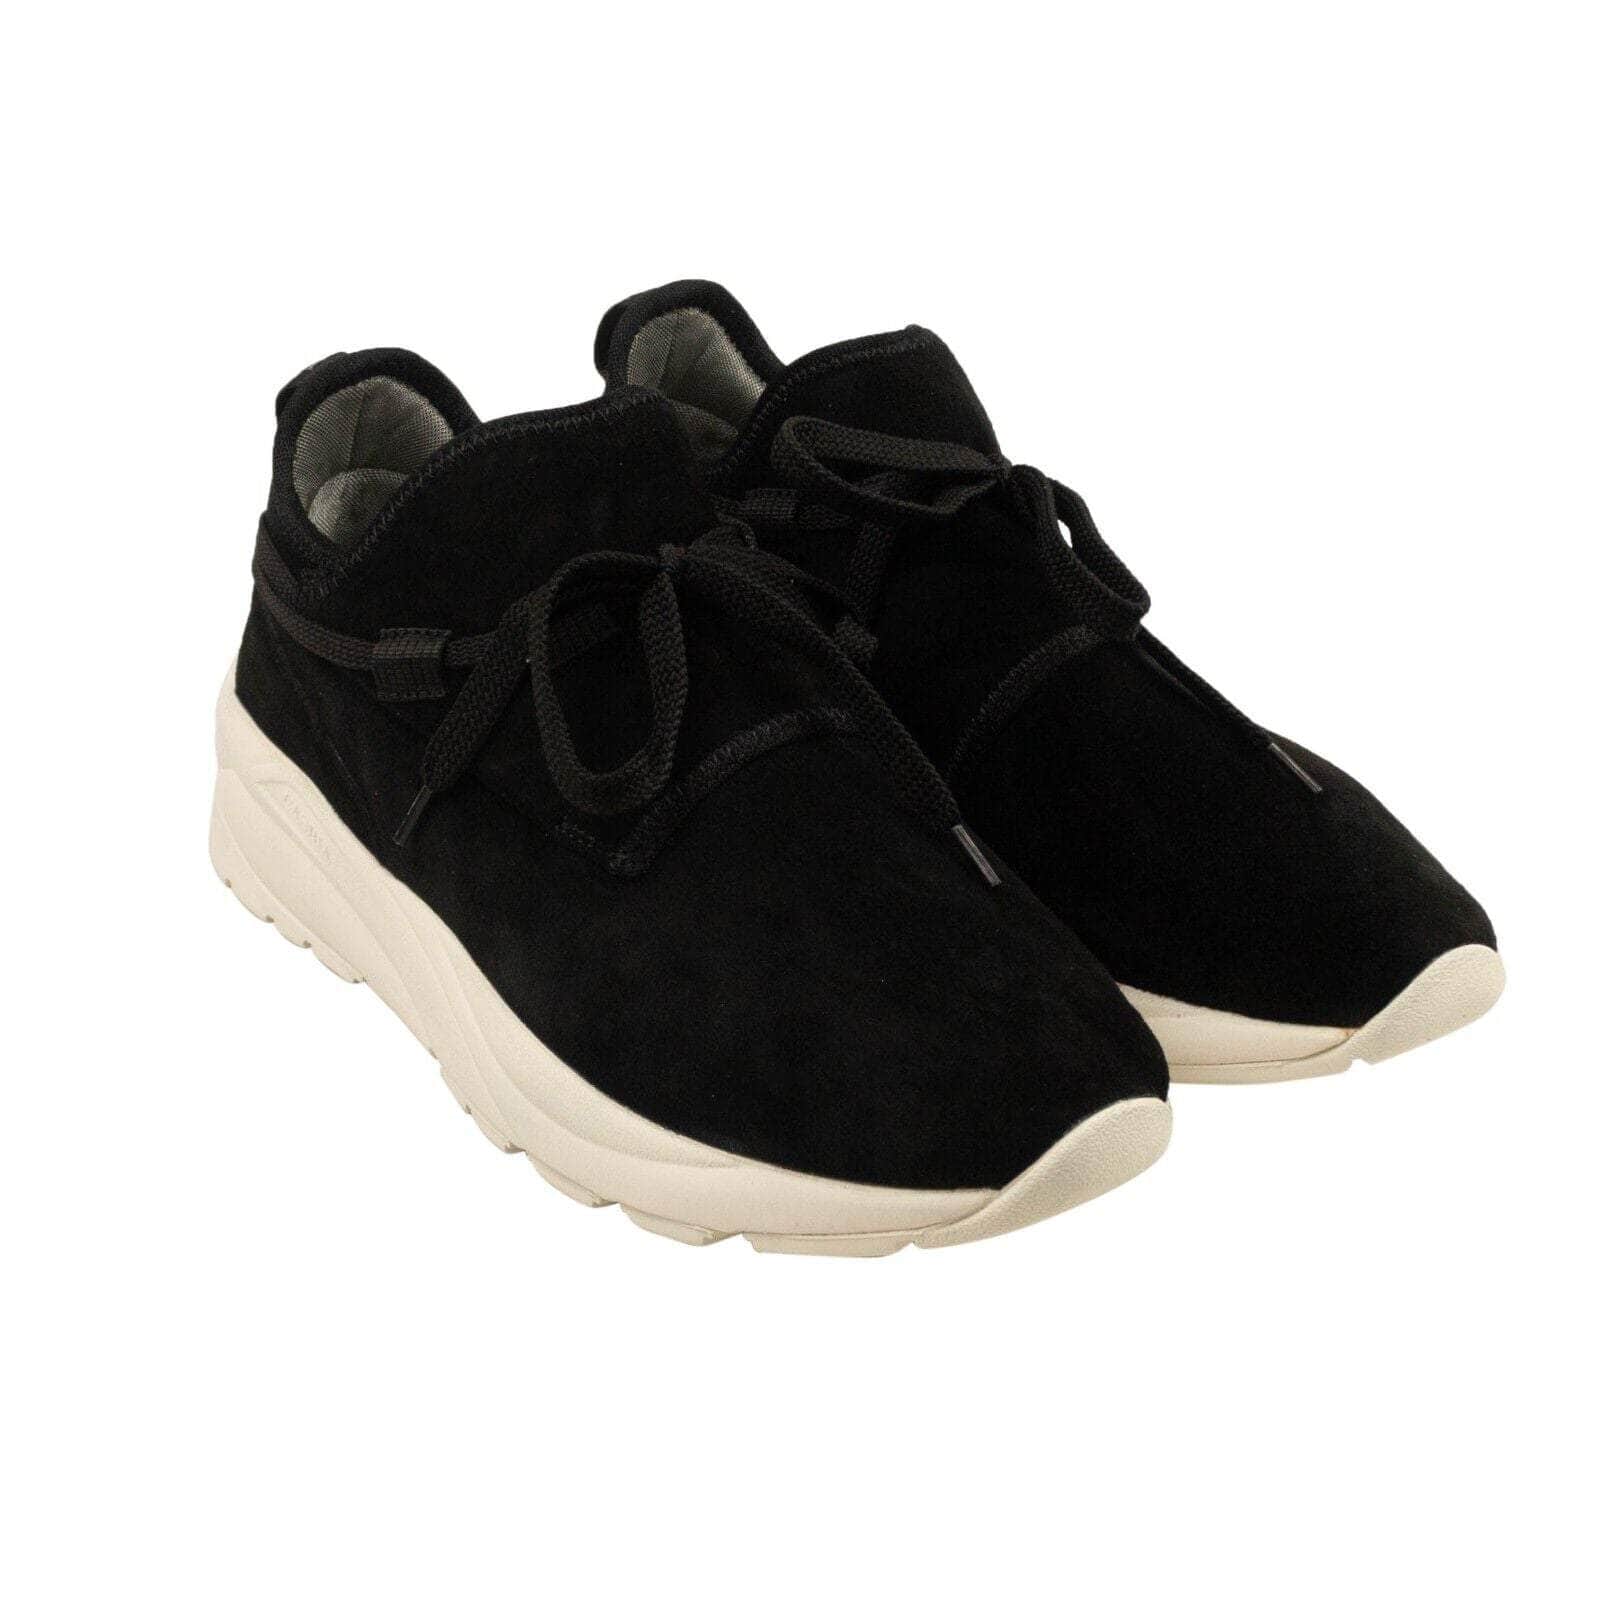 Casbia casbia, channelenable-all, chicmi, couponcollection, gender-mens, main-shoes, mens-shoes, MixedApparel, size-40, size-41, size-42, size-43, size-44, size-45, under-250 Black William Rbt Lace UpSneakers